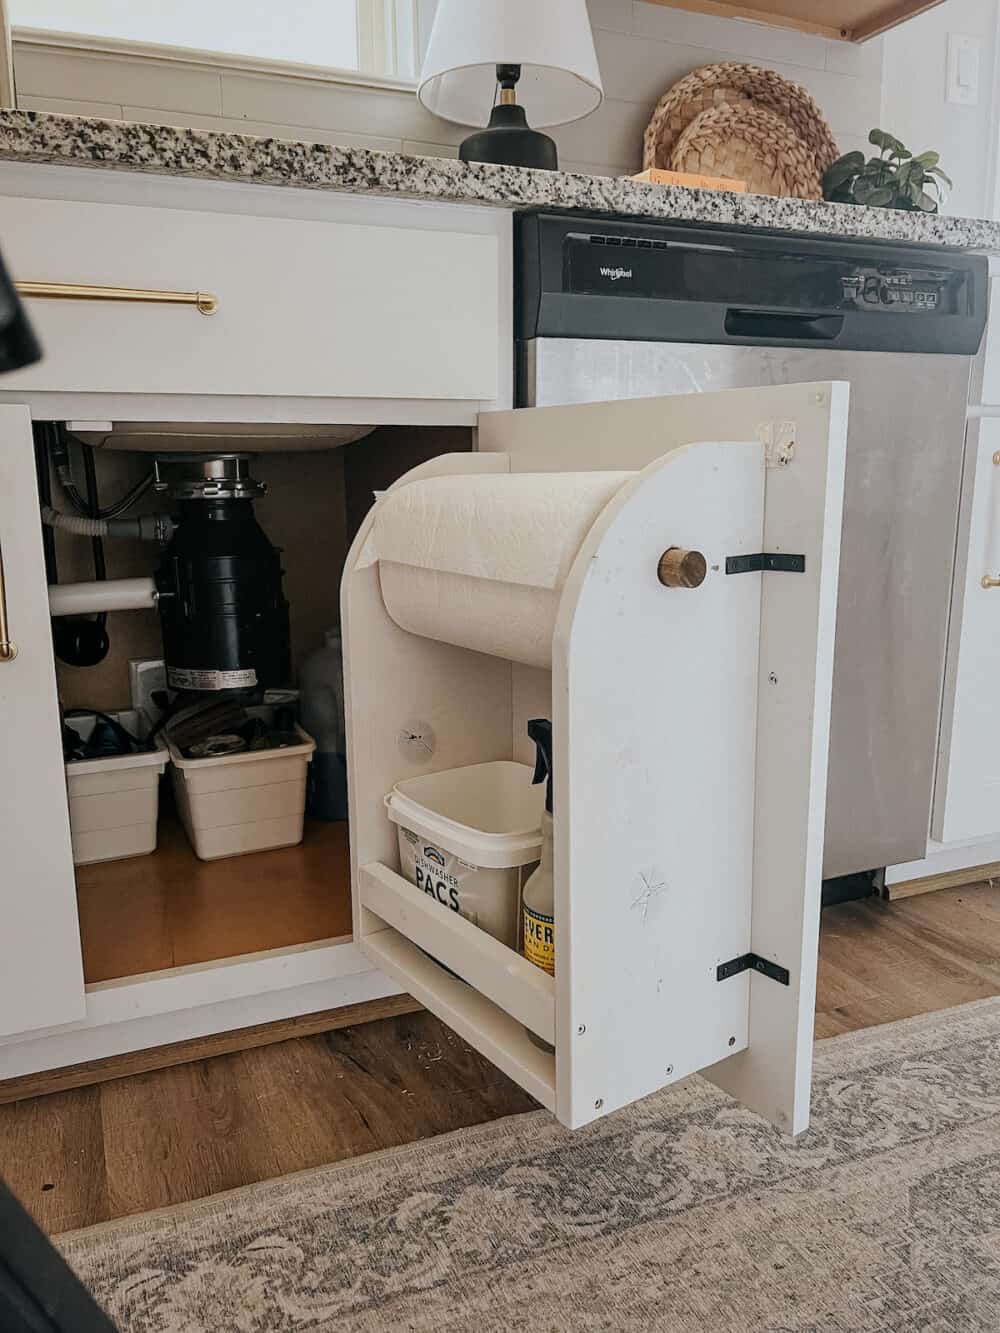 How To Organize Your Under Sink Storage - Step-By-Step Project